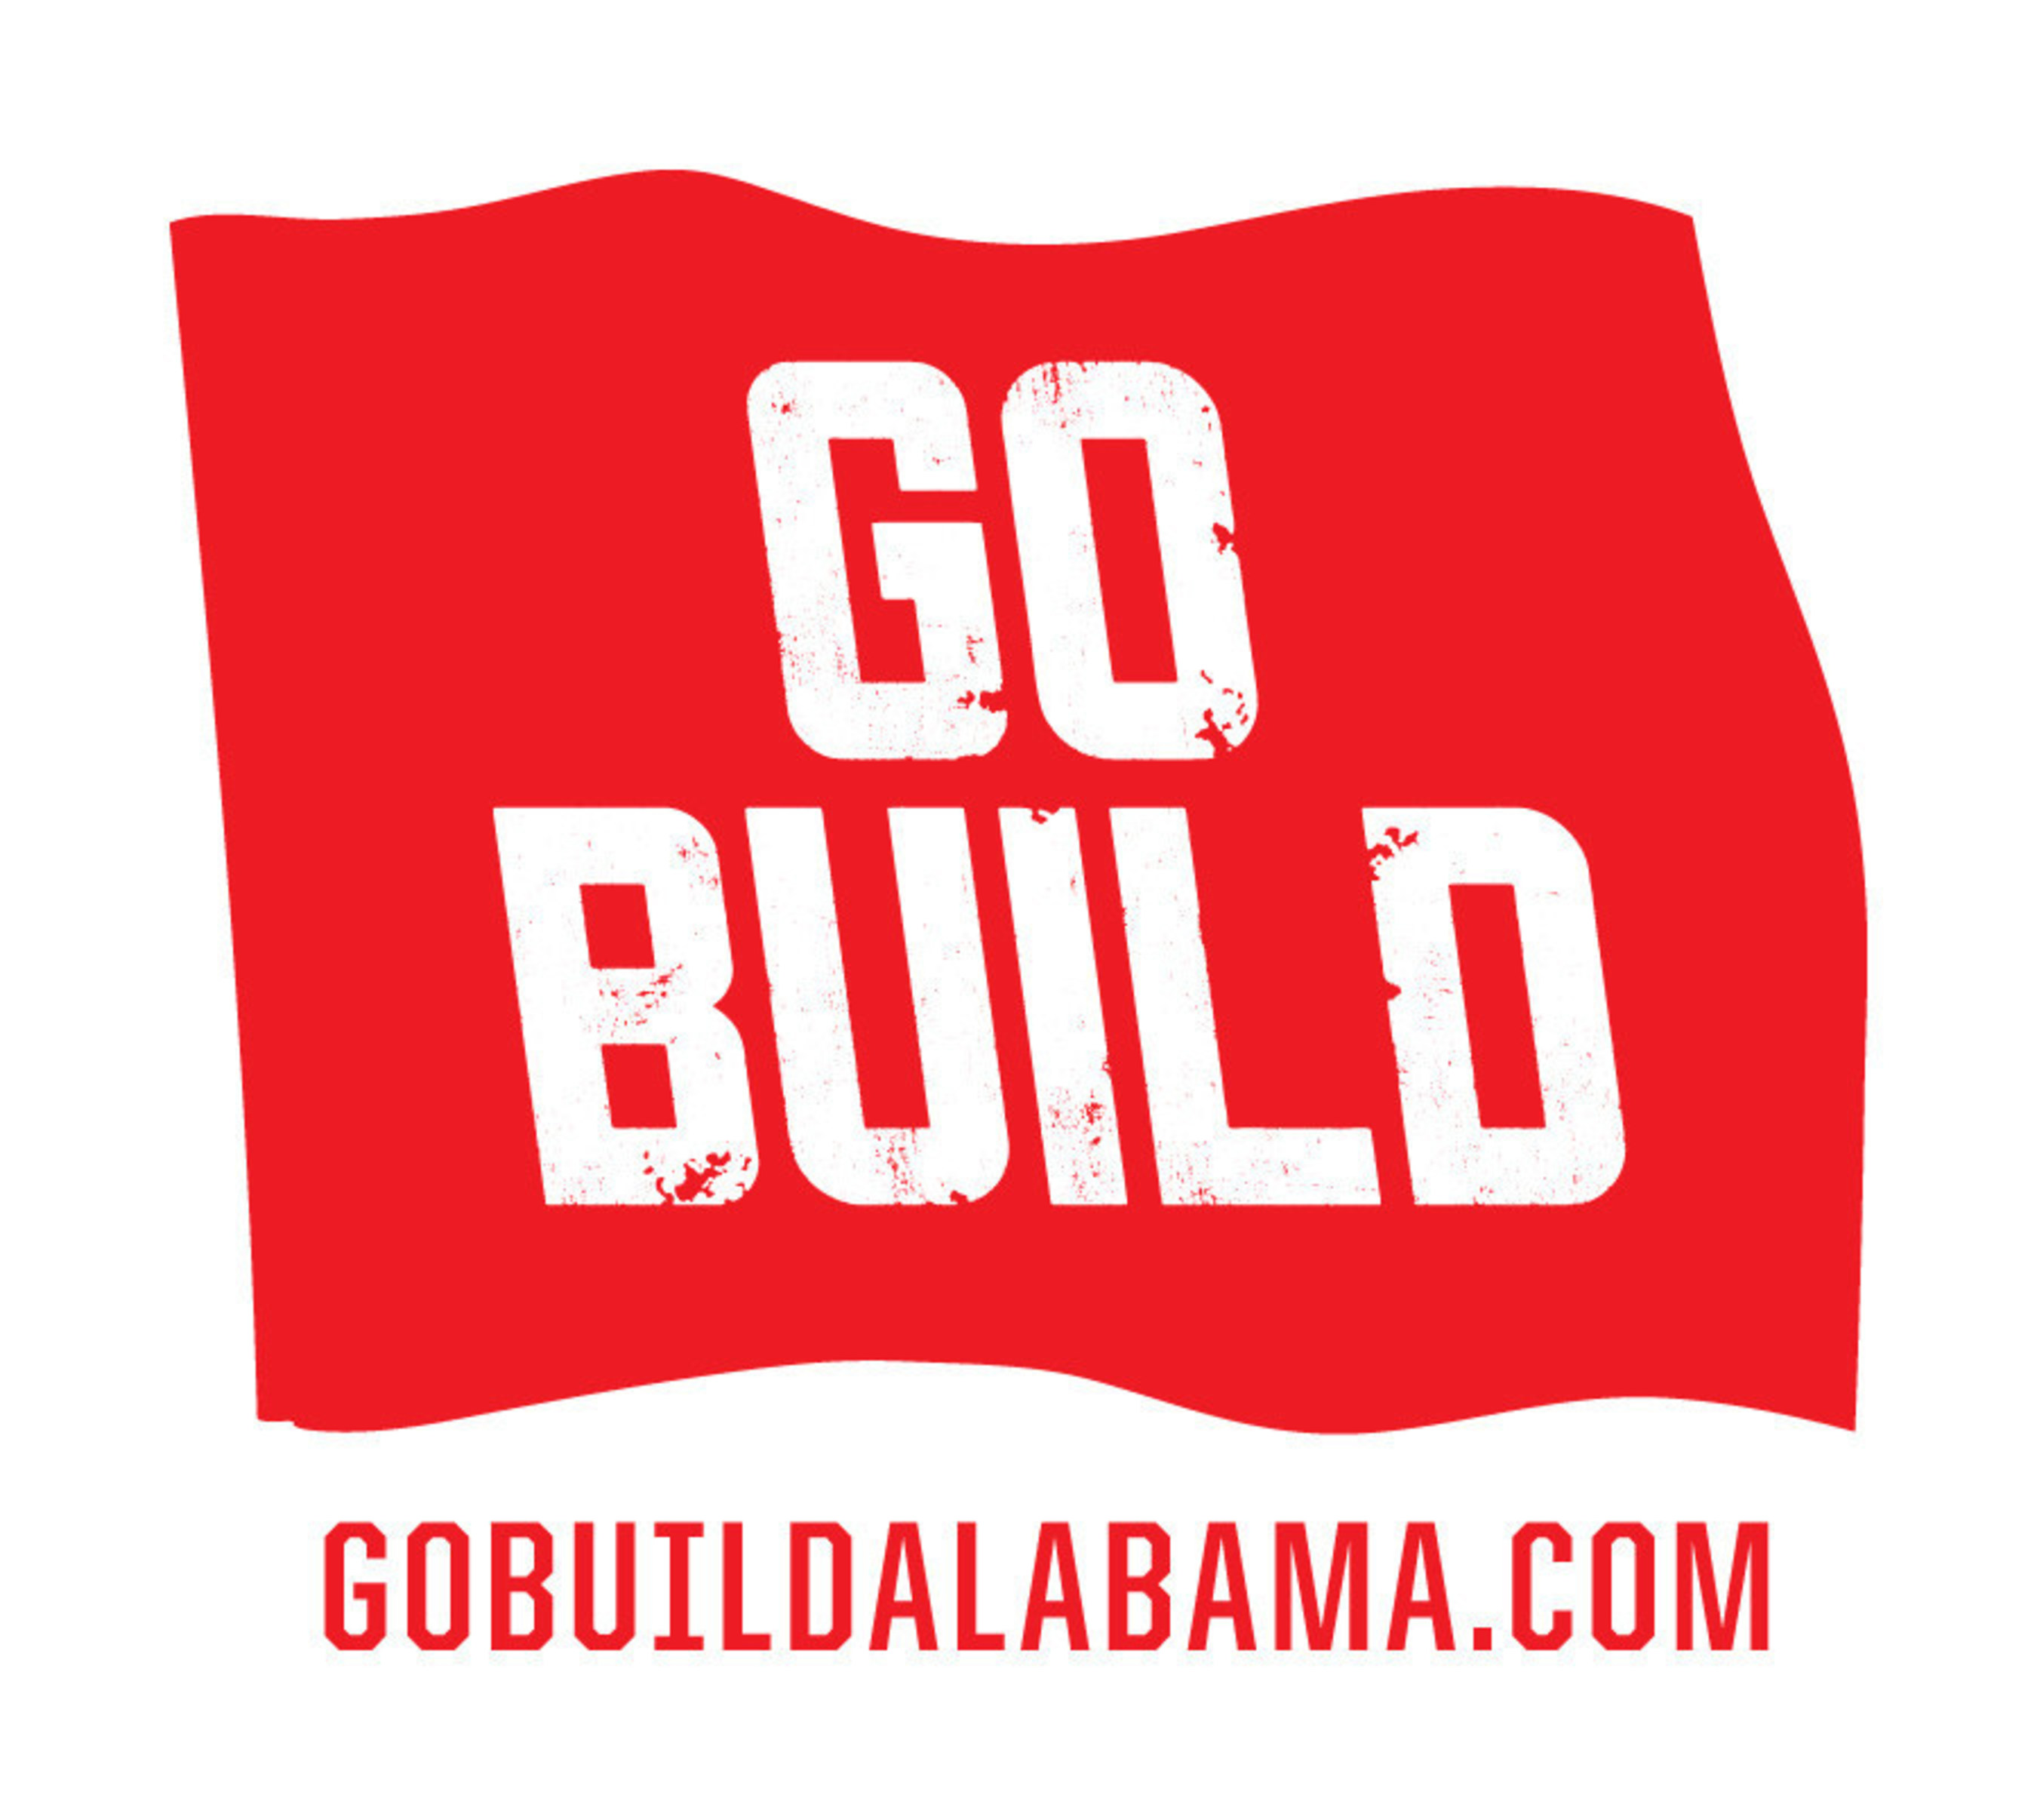 Visit www.GoBuildAlabama.com to learn more about the construction industry and training opportunities in Alabama.